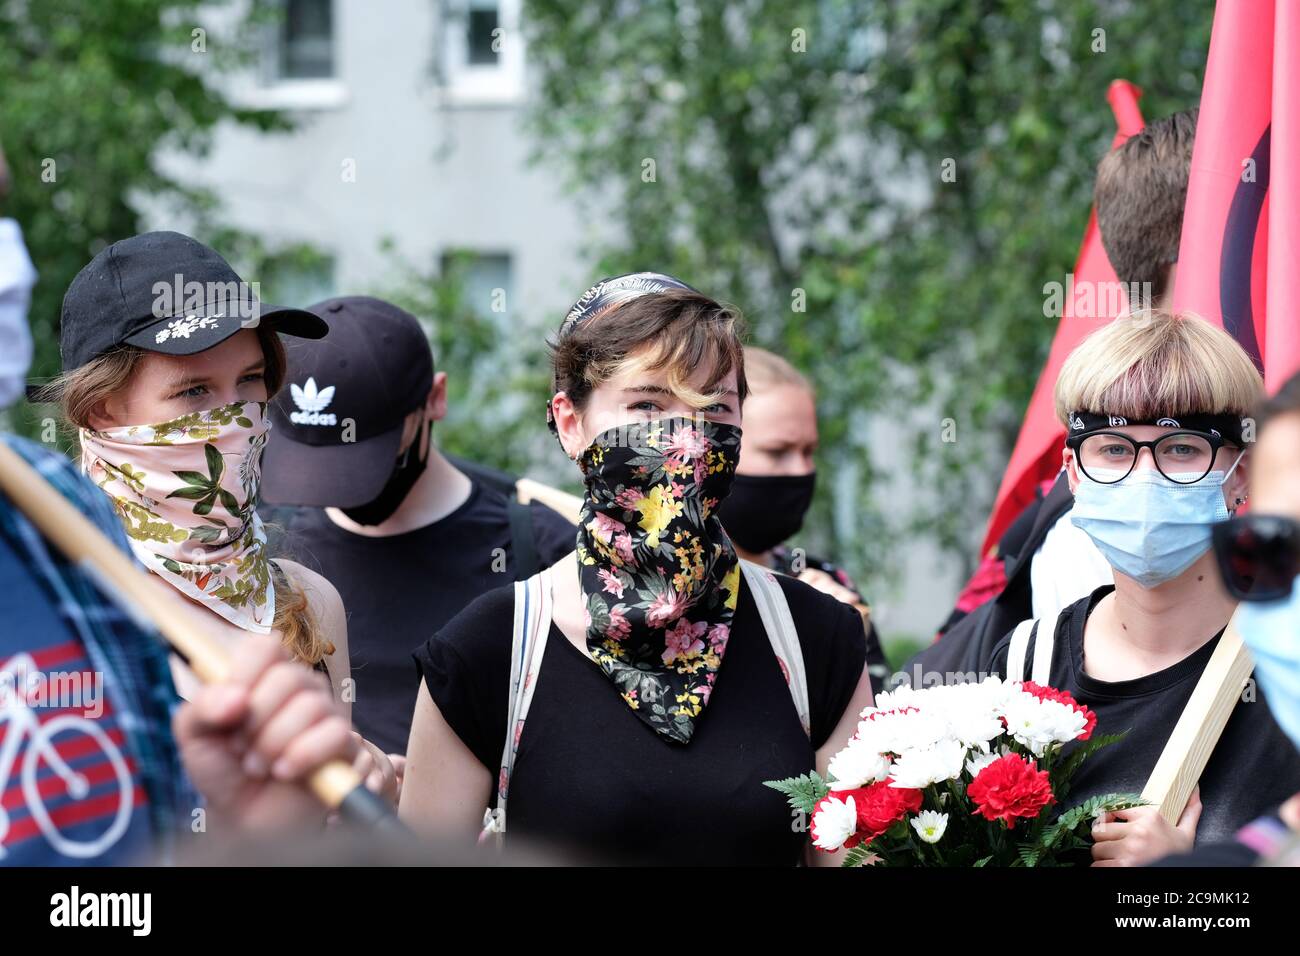 Warsaw Poland young women protesters take part in an anti-fascist protest in Warsaw on 1st August 2020 wearing coronavirus facemasks Stock Photo